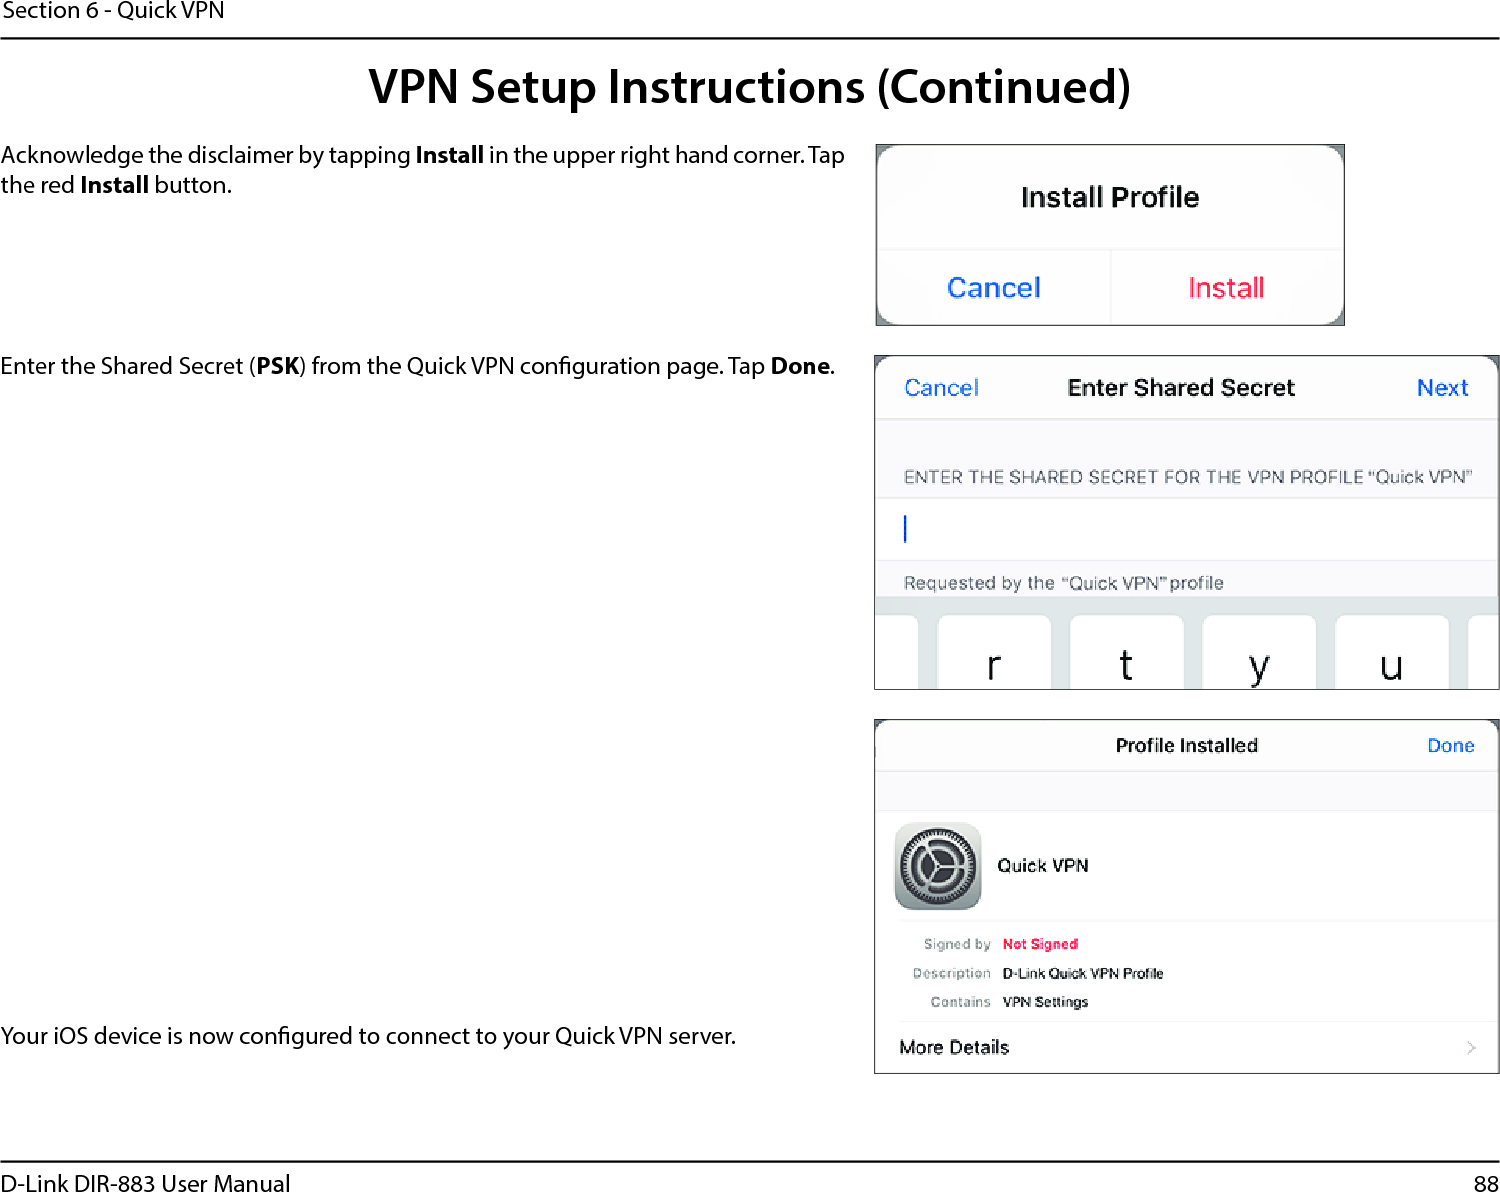 88D-Link DIR-883 User ManualSection 6 - Quick VPNYour iOS device is now congured to connect to your Quick VPN server.Enter the Shared Secret (PSK) from the Quick VPN conguration page. Tap Done.Acknowledge the disclaimer by tapping Install in the upper right hand corner. Tap the red Install button.VPN Setup Instructions (Continued)